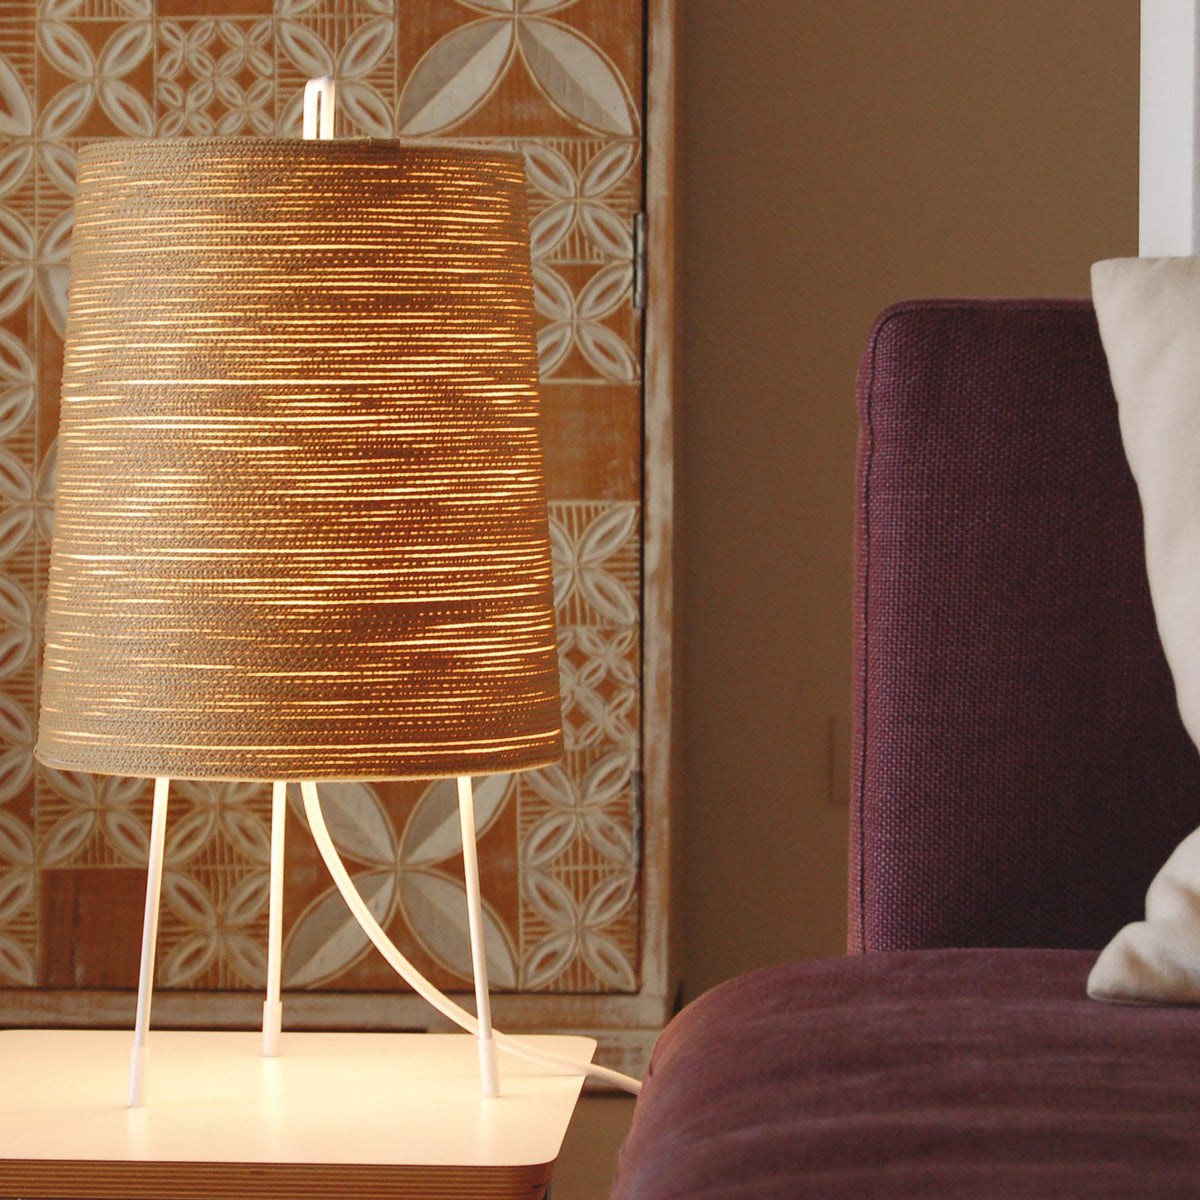 Tali Table Lamp by ZANEEN design